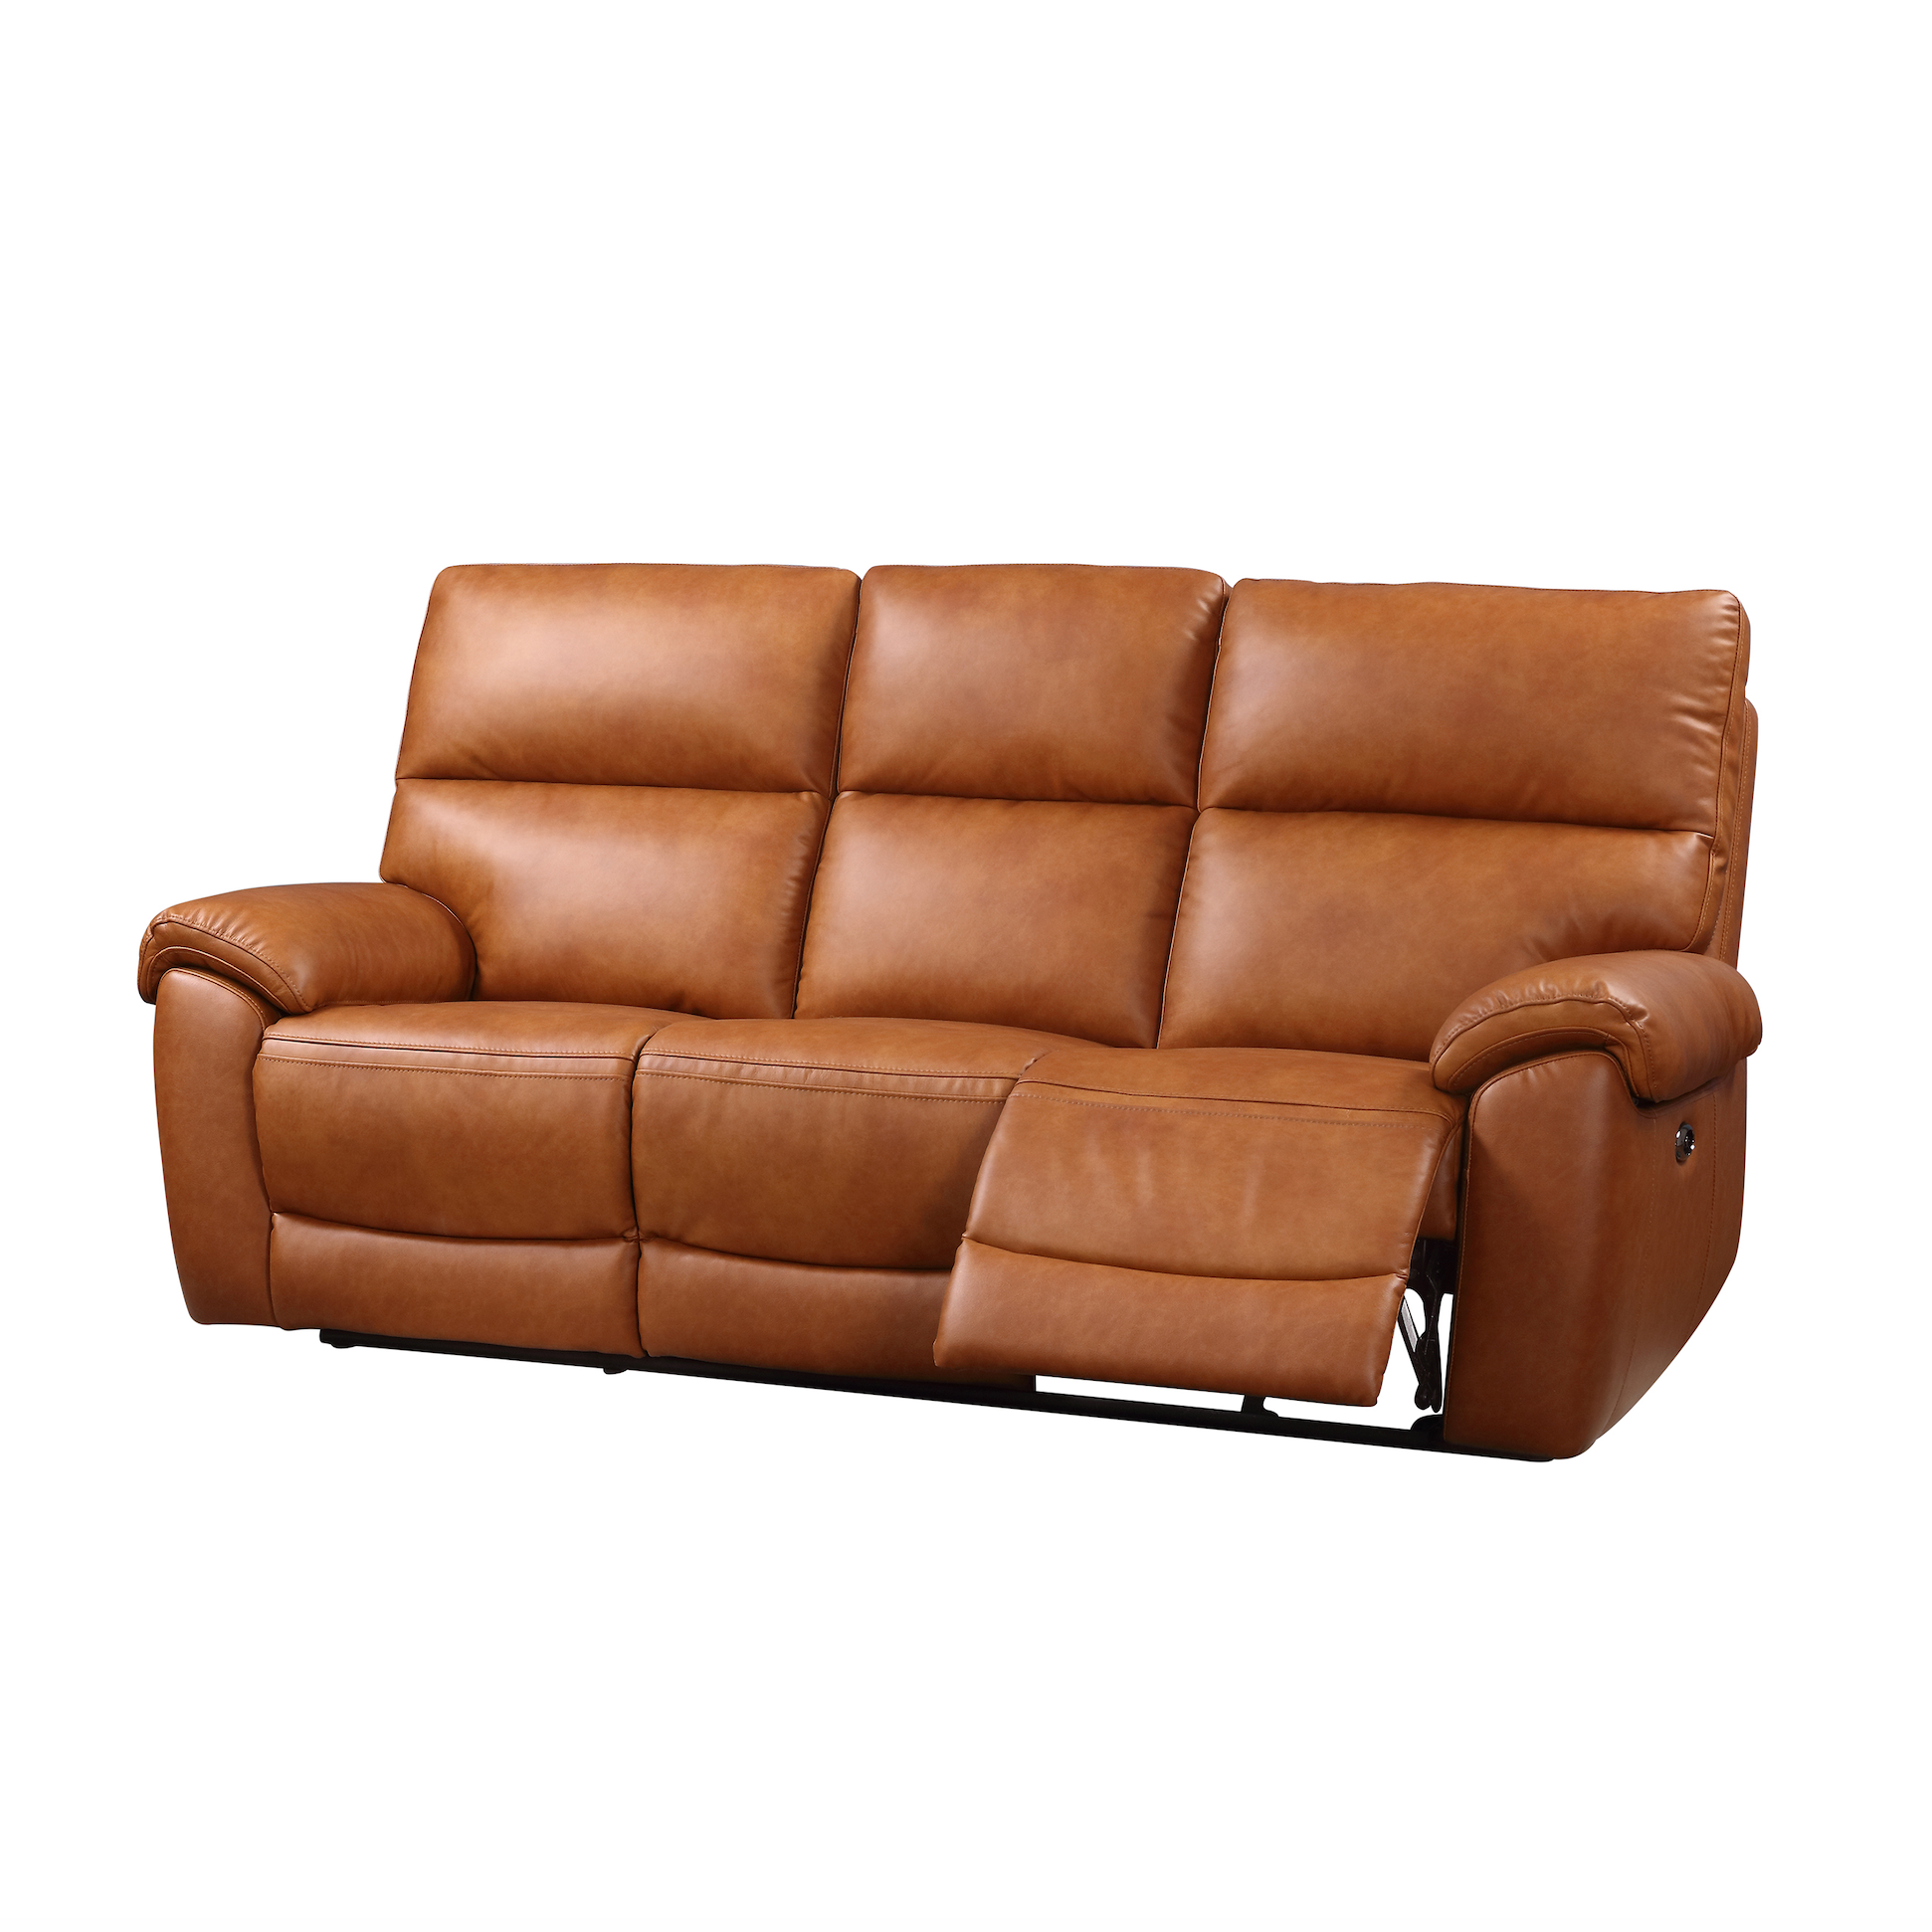 Rocco 3 Seater Sofa Power Recliner Tan Leather